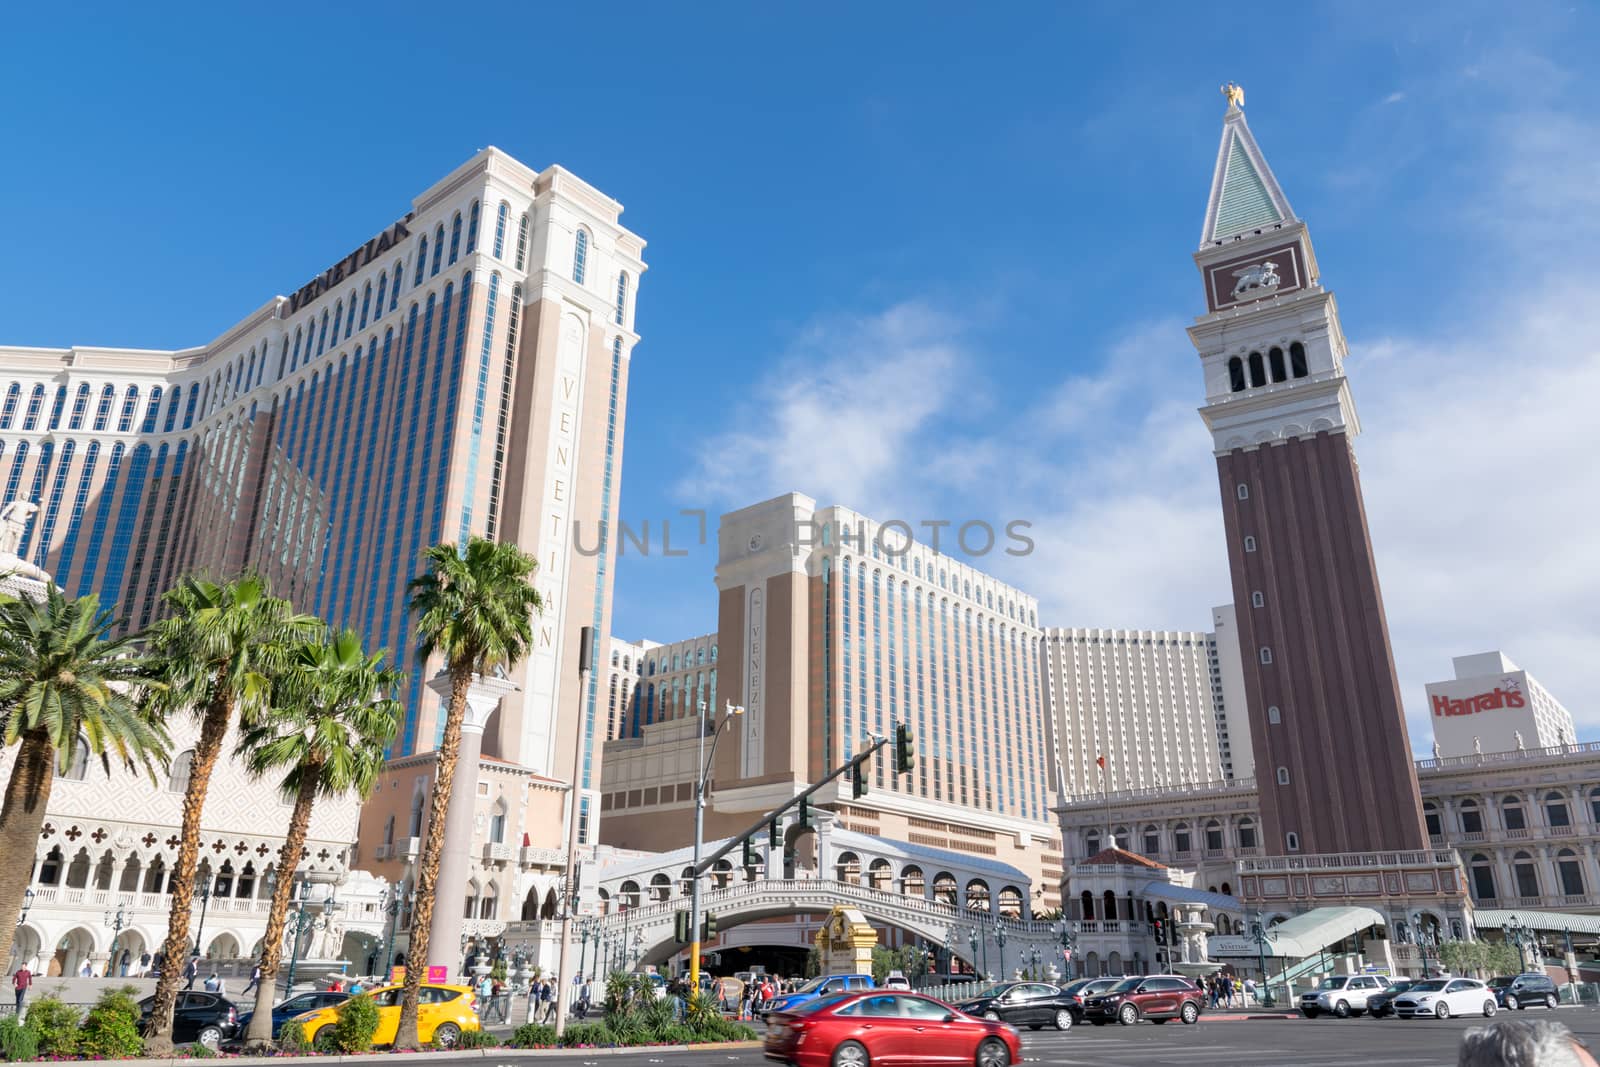 Las Vegas, Nevada/United states Of America-April 13, 2018 The beauty of the architecture of the buildings, hotels and entertainment on Las Vegas Blvd Street is a beautiful landmark in the city of Las Vegas.